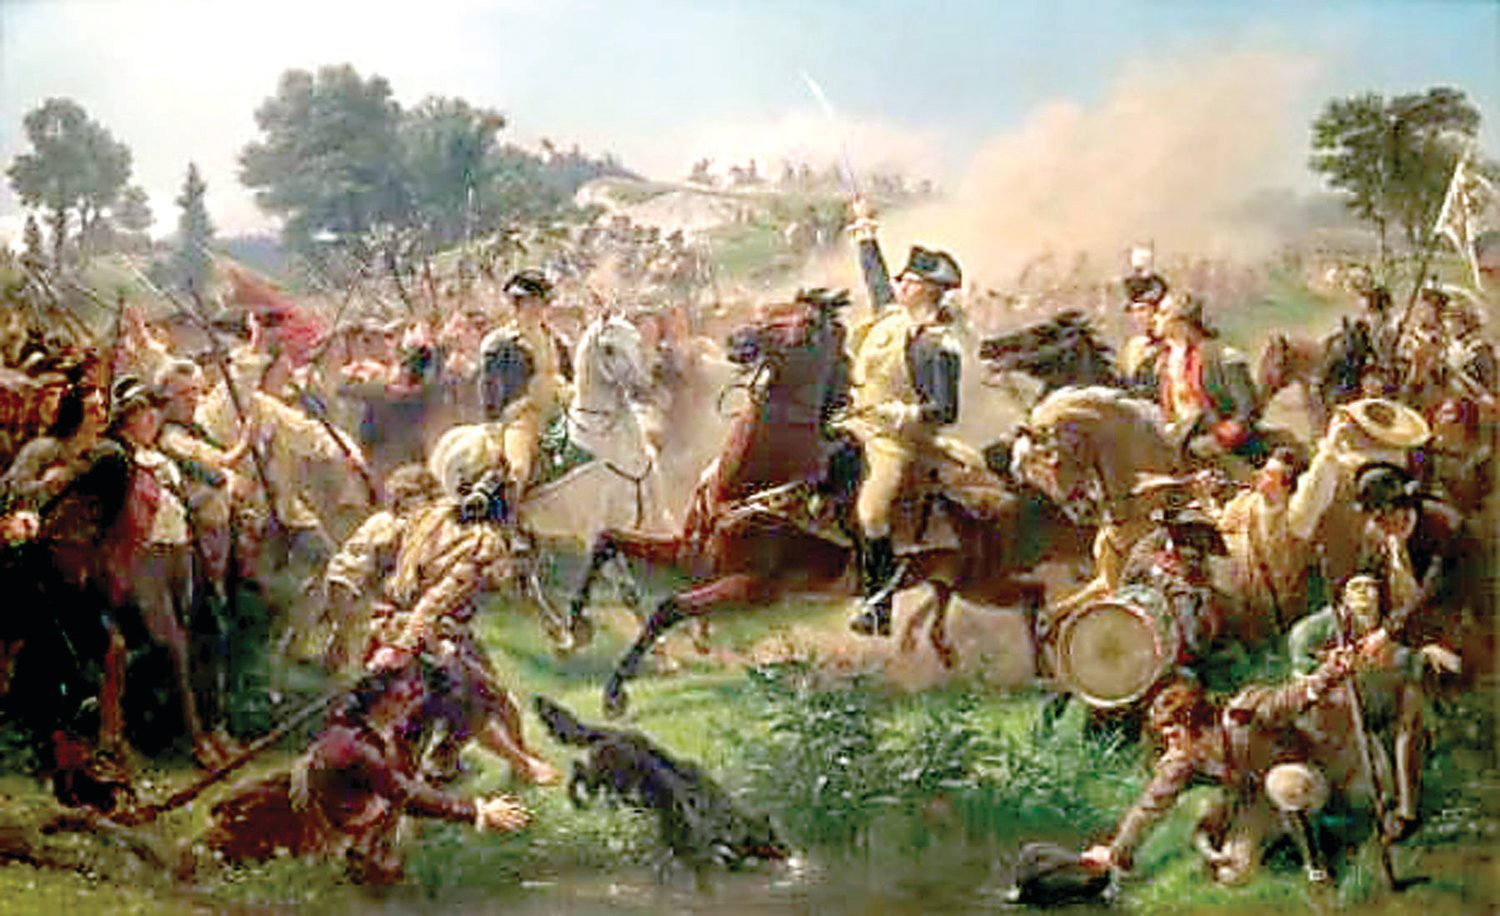 “Washington Rallying the Troops at Monmouth”